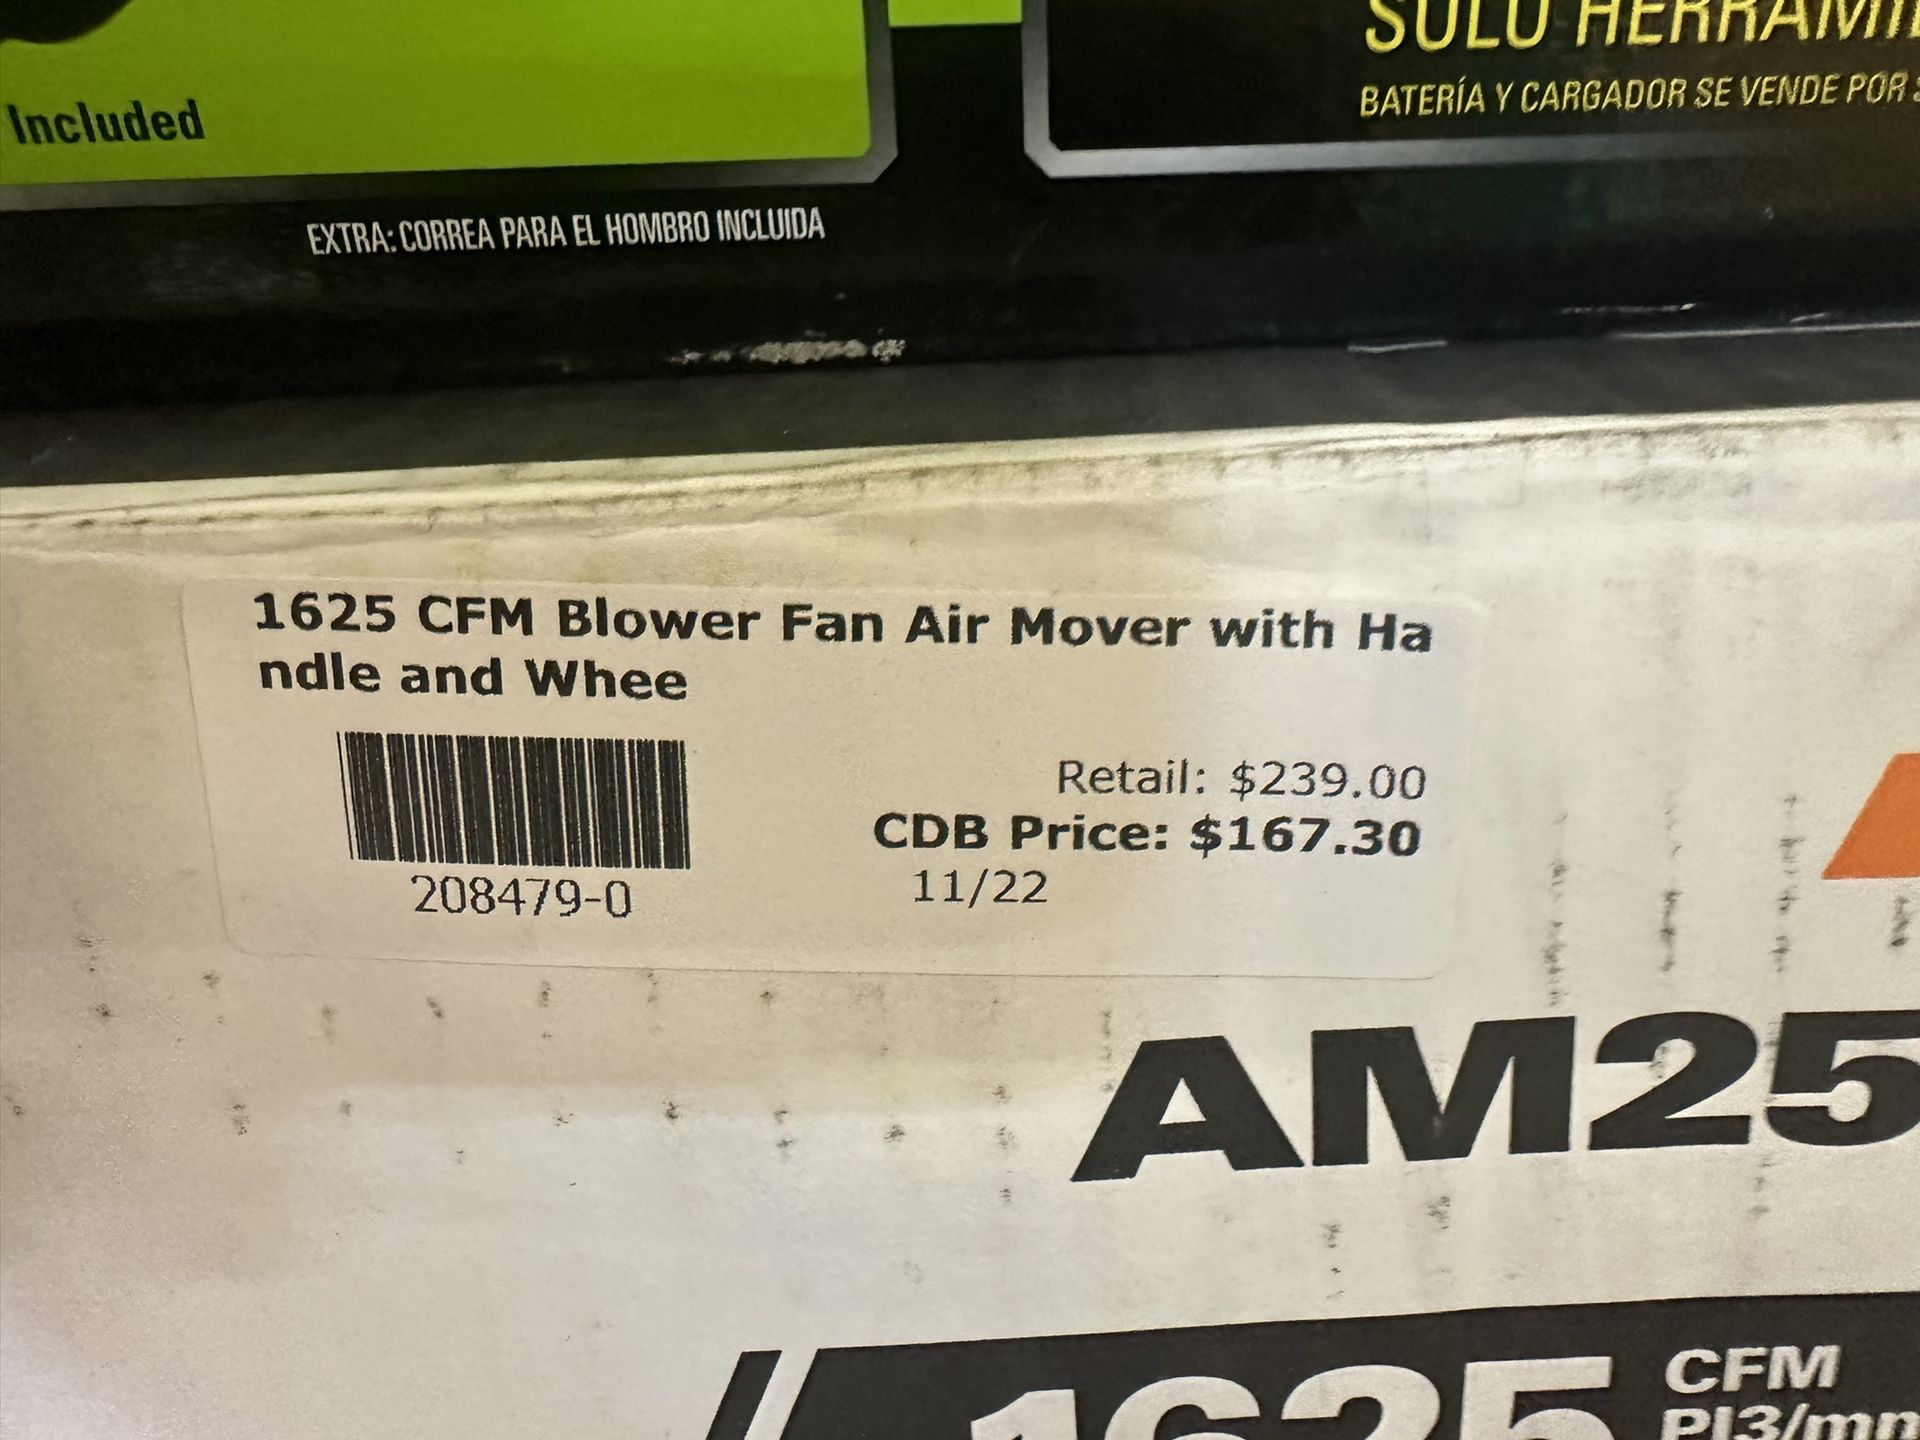 1625 CFM Blower Fan Air Mover with Ha ndle and Whee for Sale in Phoenix, AZ  OfferUp